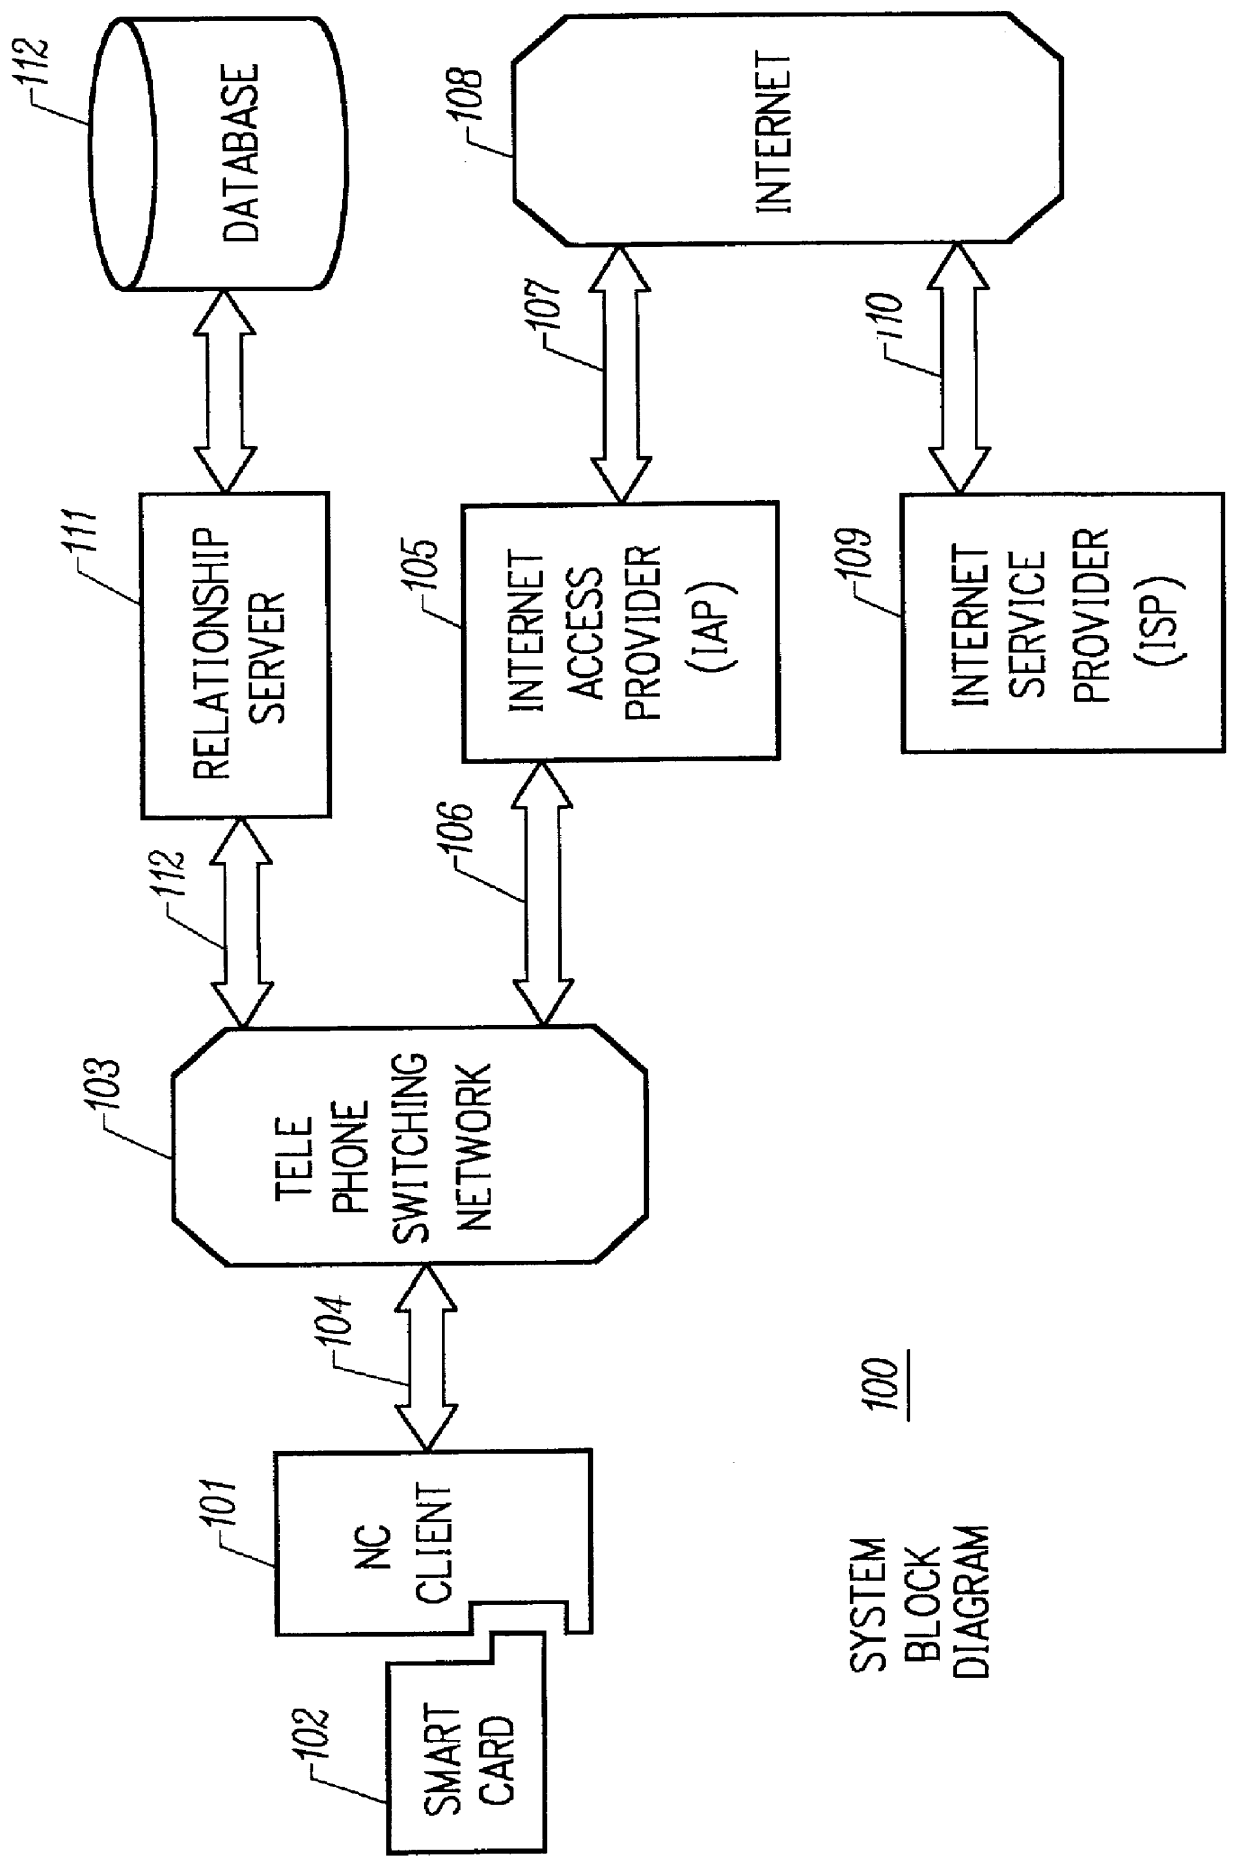 Mechanism for users with internet service provider smart cards to roam among geographically disparate authorized network computer client devices without mediation of a central authority